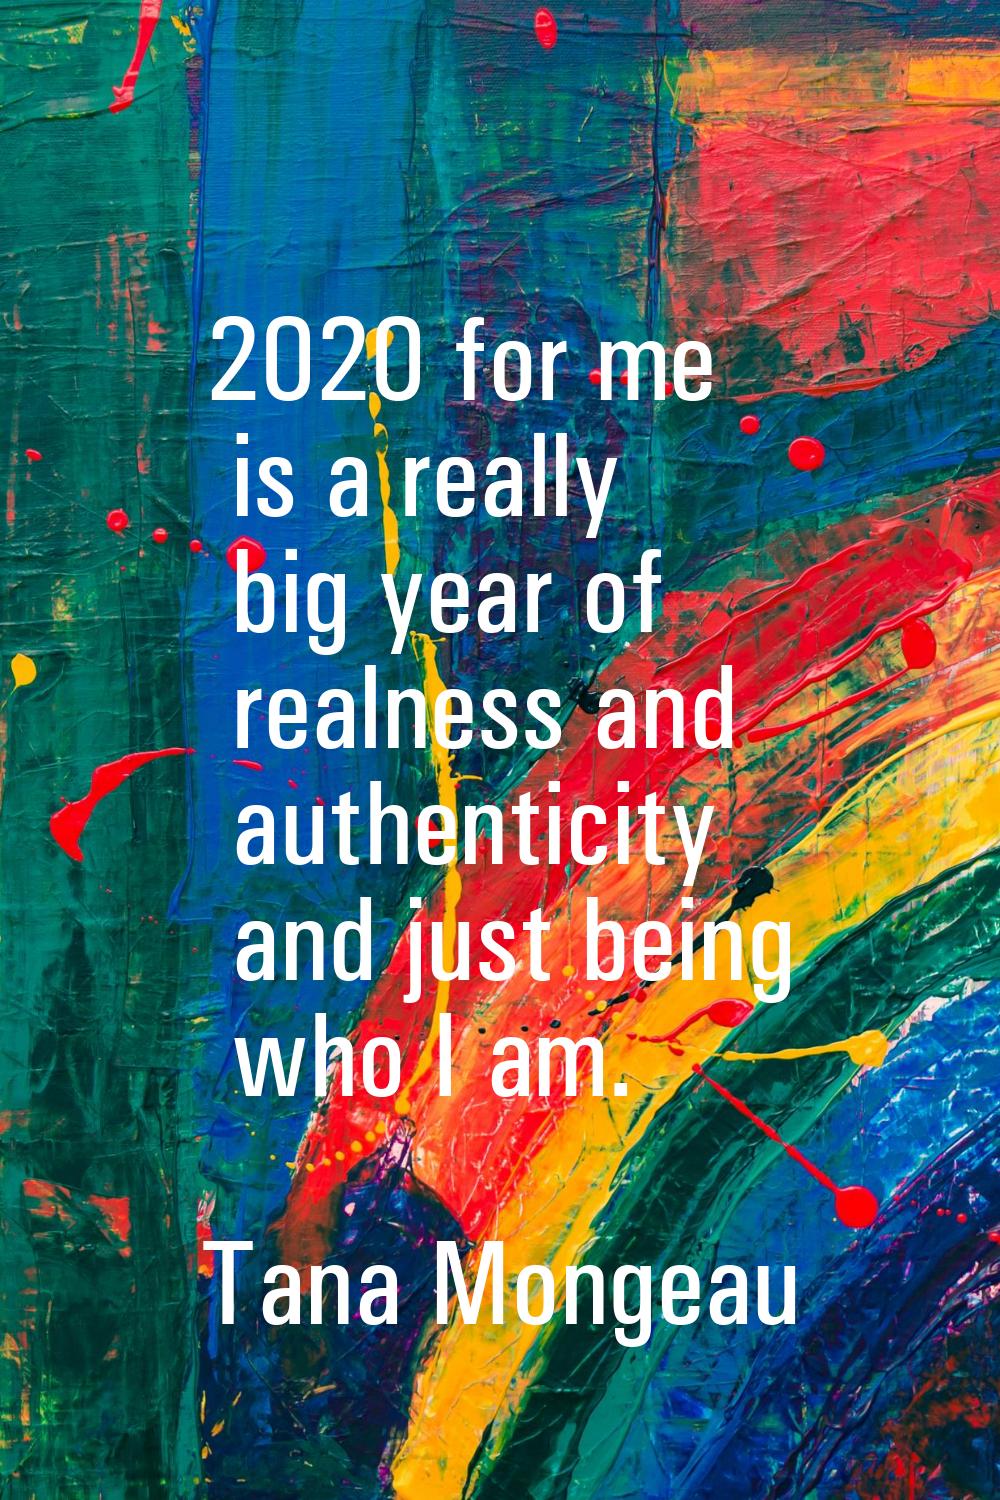 2020 for me is a really big year of realness and authenticity and just being who I am.